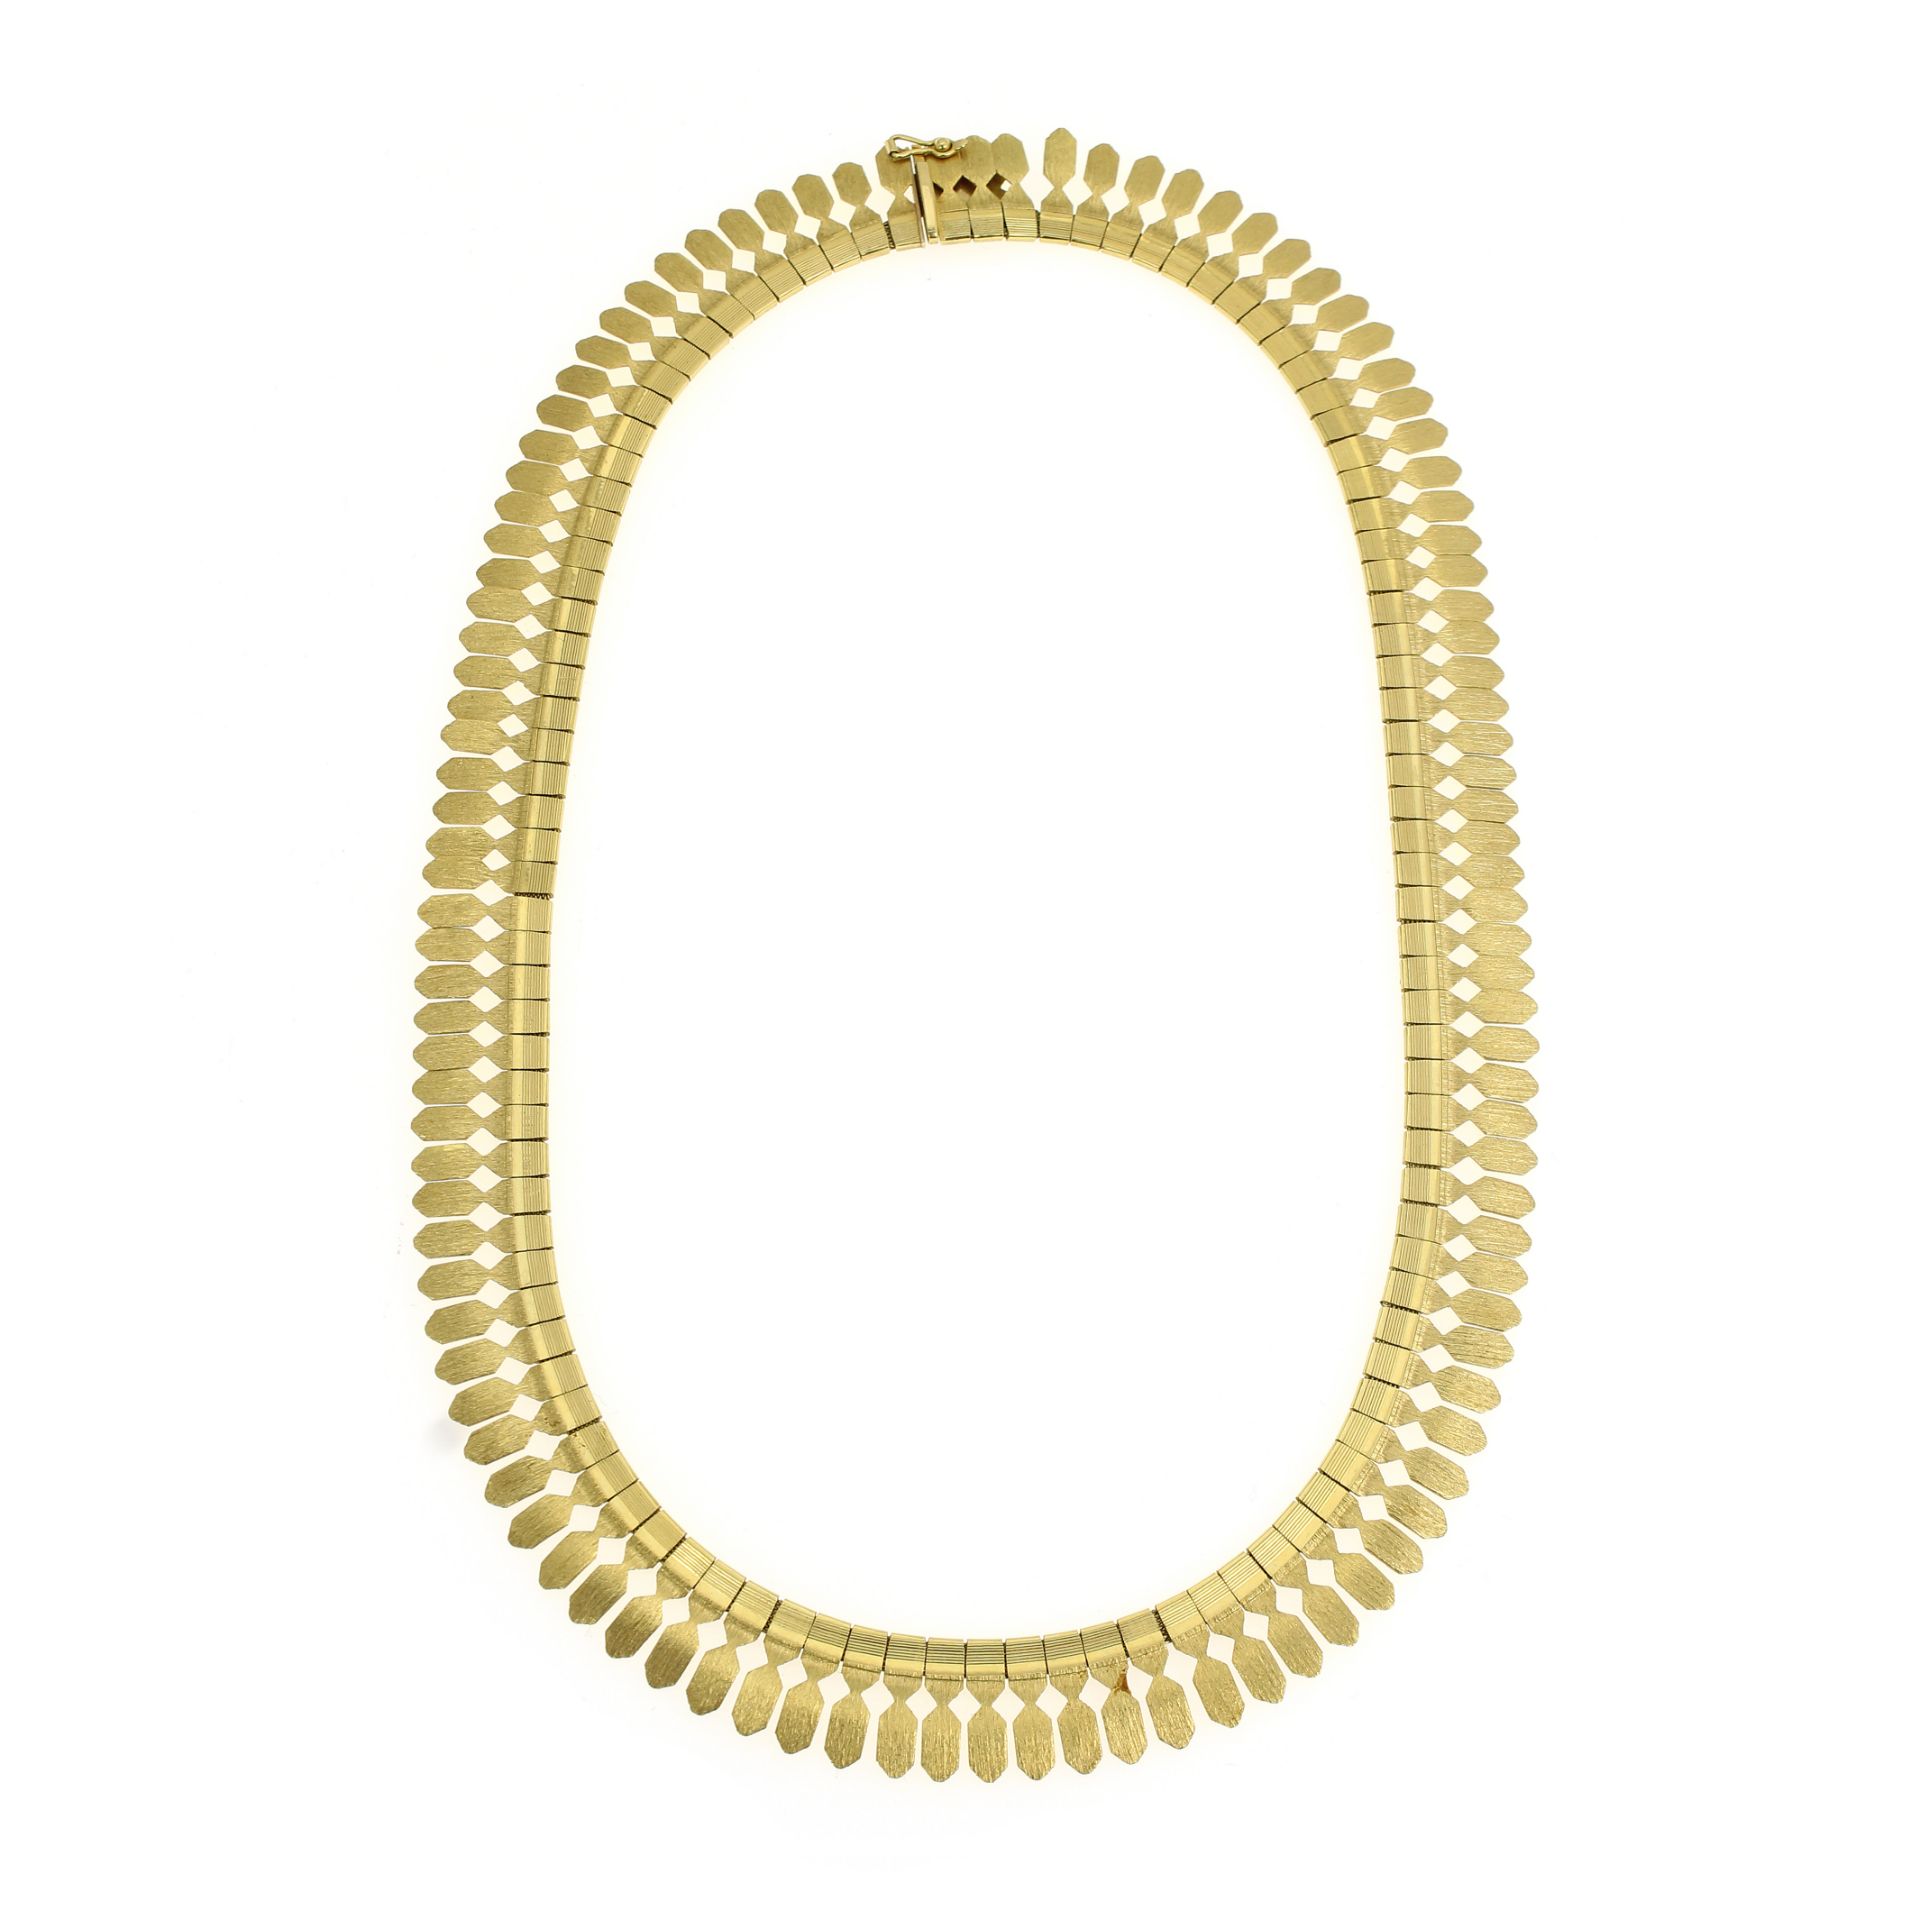 A VINTAGE FANCY LINK NECKLACE in 18ct yellow gold, the articulated body formed of textured cut out